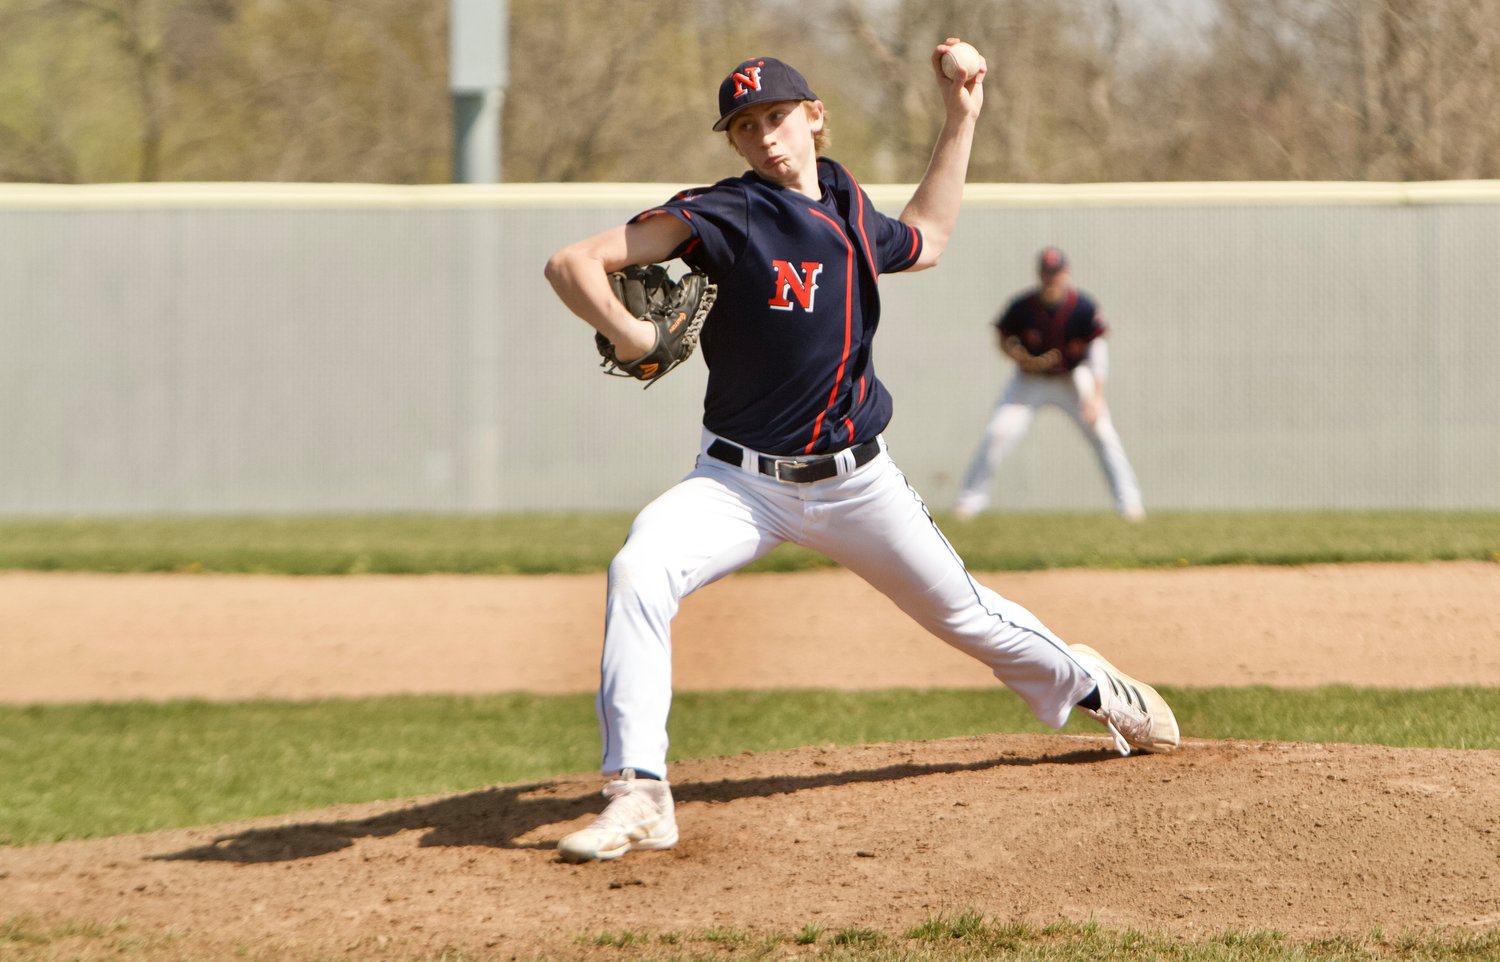 Charger sophomore Jarrod Kirsch thew his second career no-hitter as North Montgomery took down county rival Southmont 2-0 on Saturday.